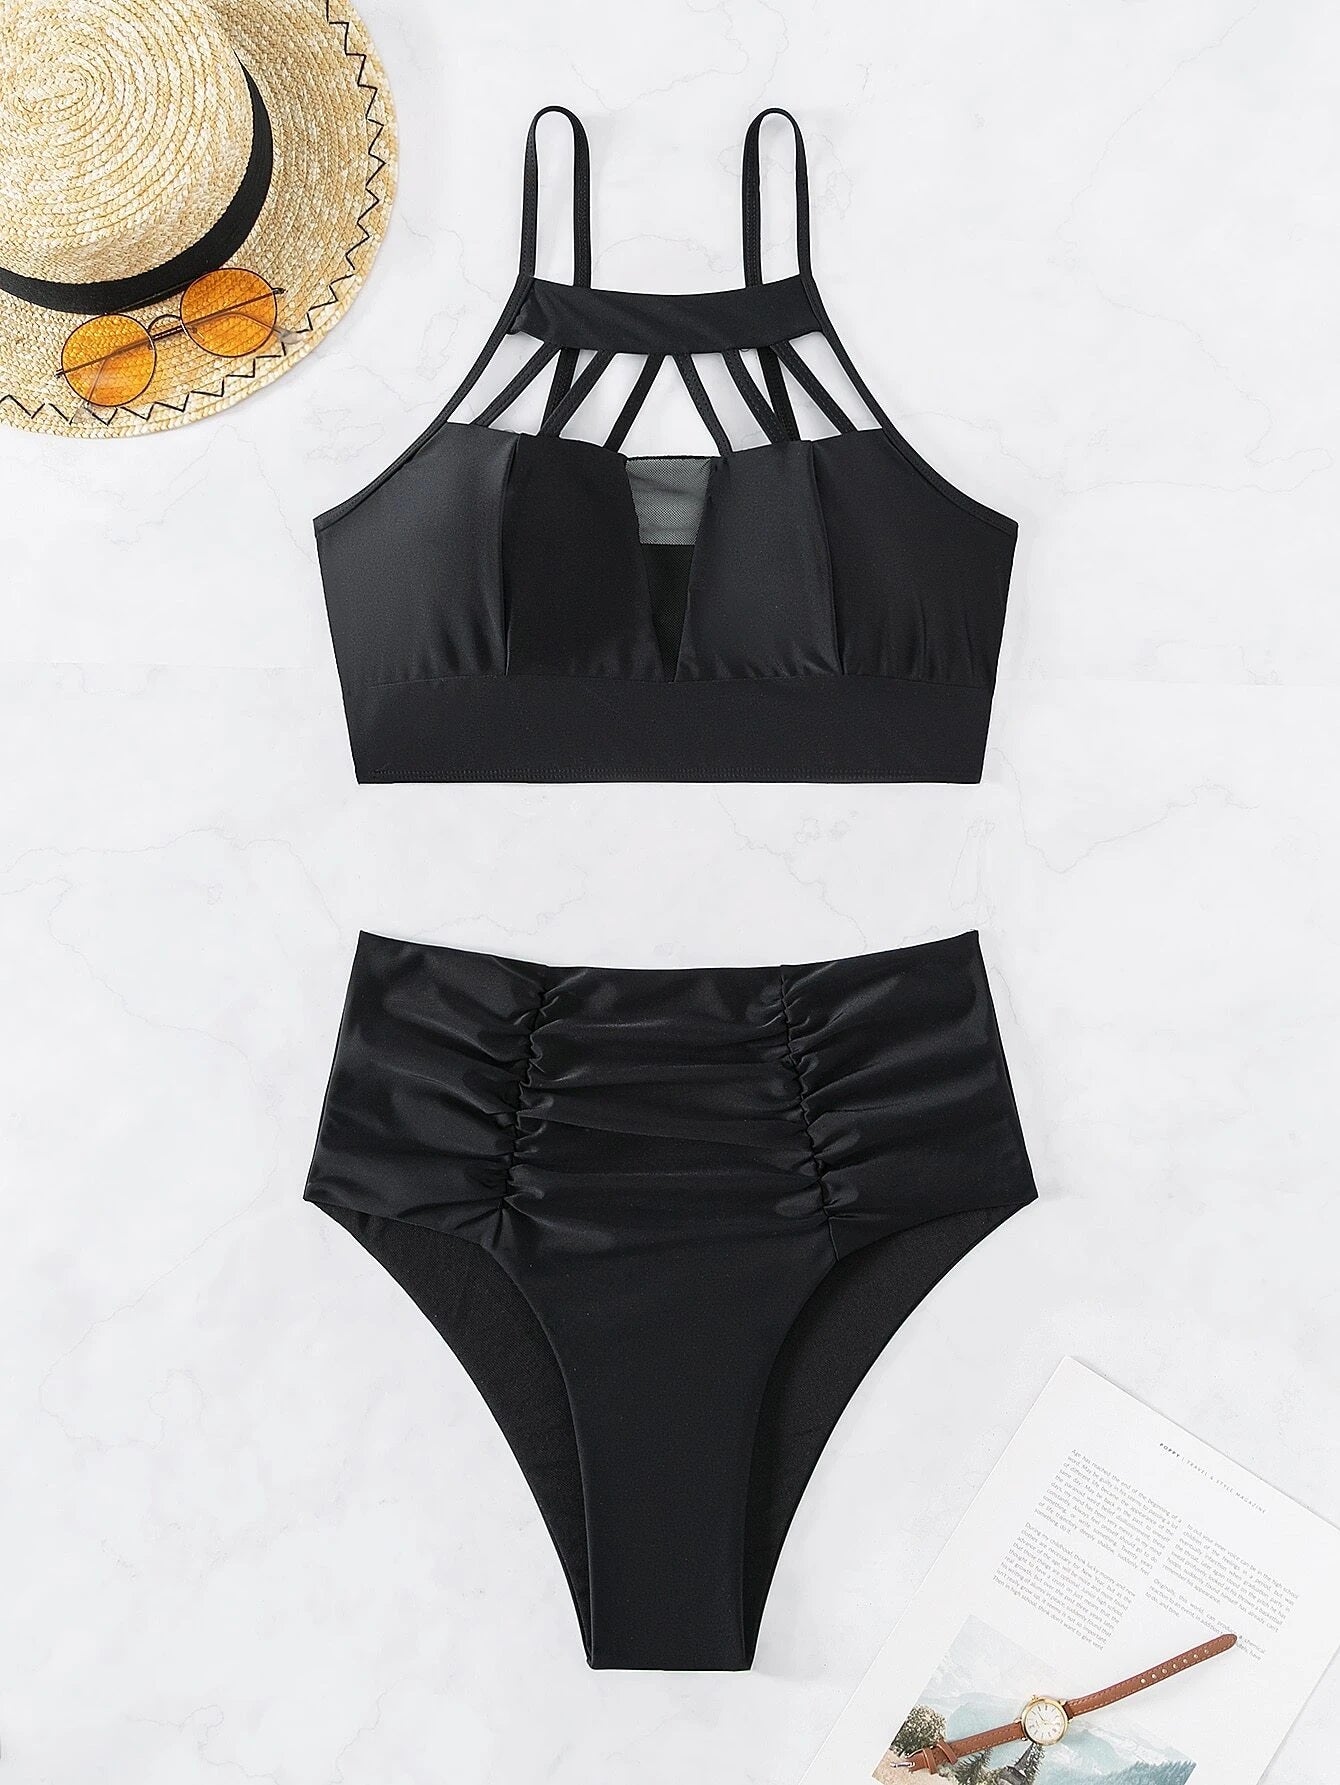 CM-SWS618353 Women Trendy Seoul Style Cut-Out Ruched High Waisted Bikini Swimsuit